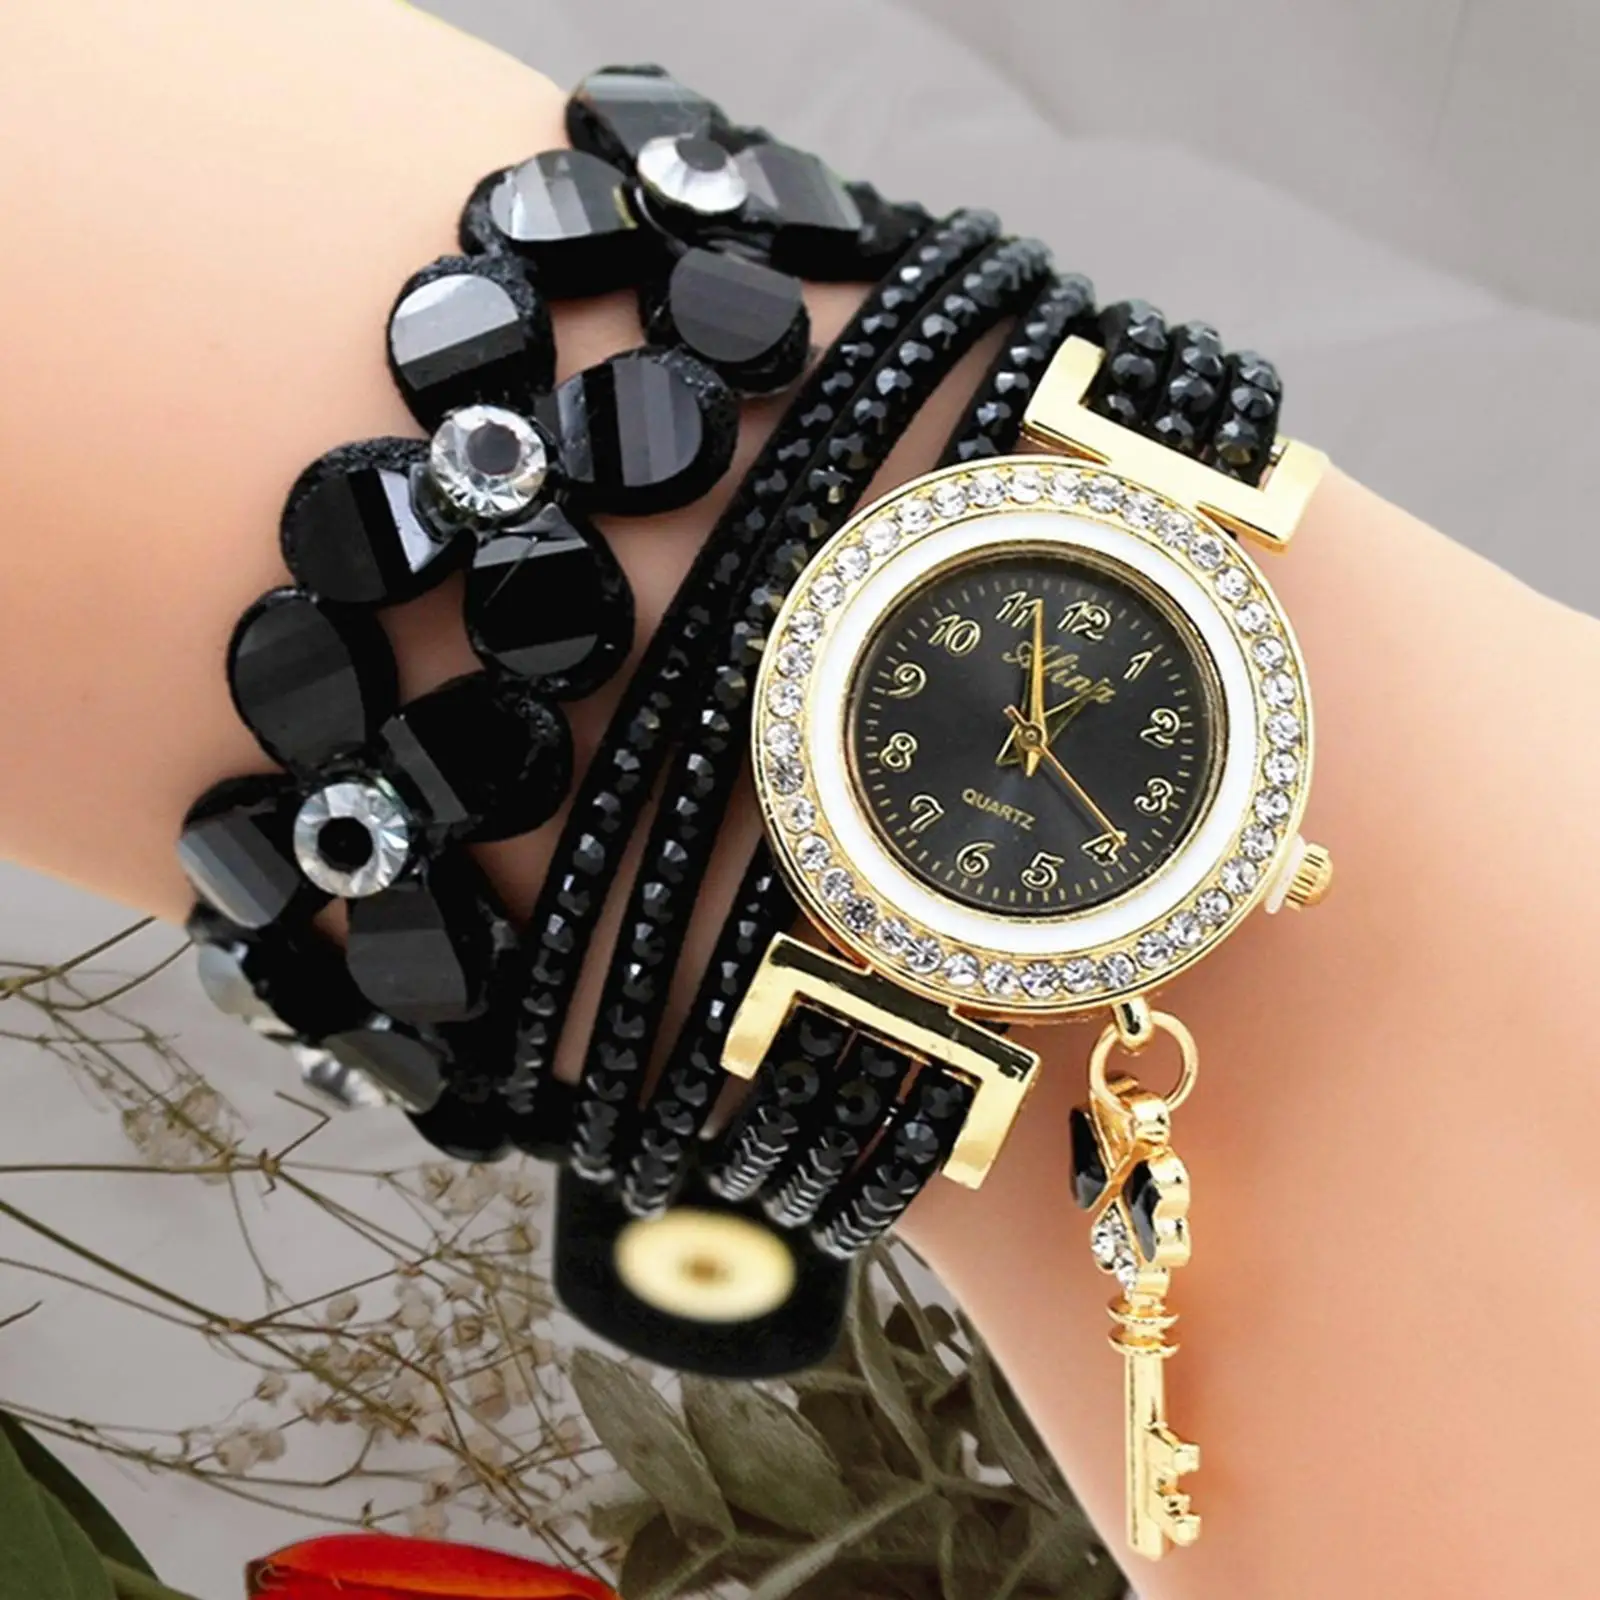 Bracelet Watch Time Display Strap Watch Durable Pointer Women Watch for Travel Outdoor Activities Birthday Gift Street Shopping